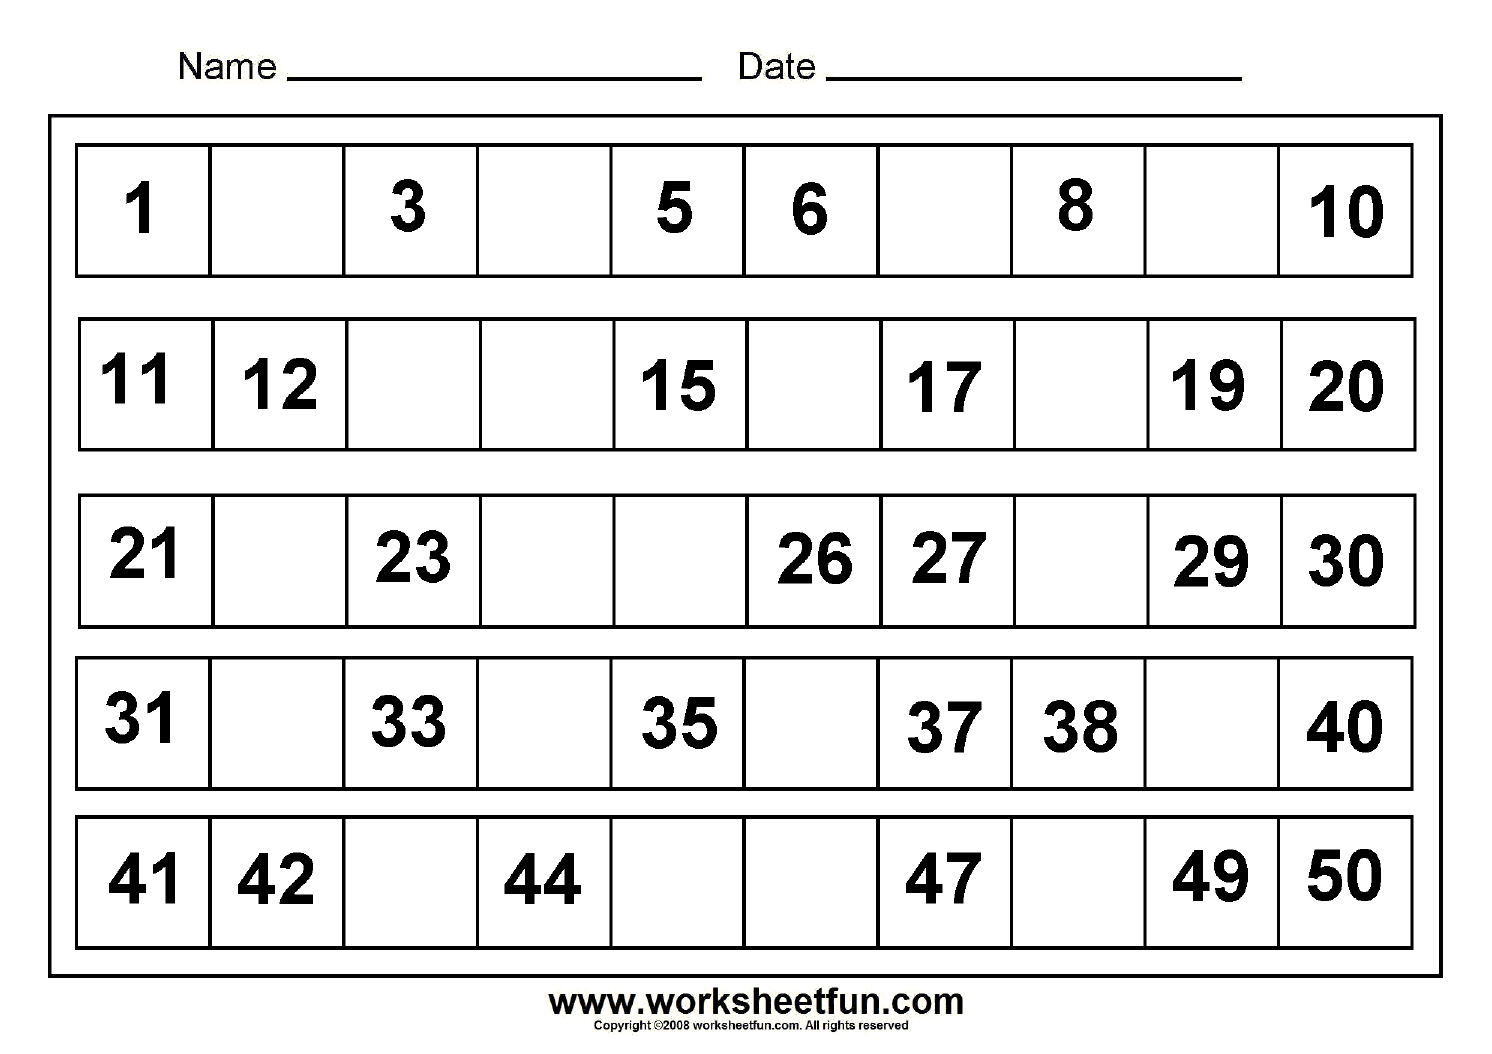 13 Best Images of Numbers 1 25 Worksheets - Tracing Numbers 1-30